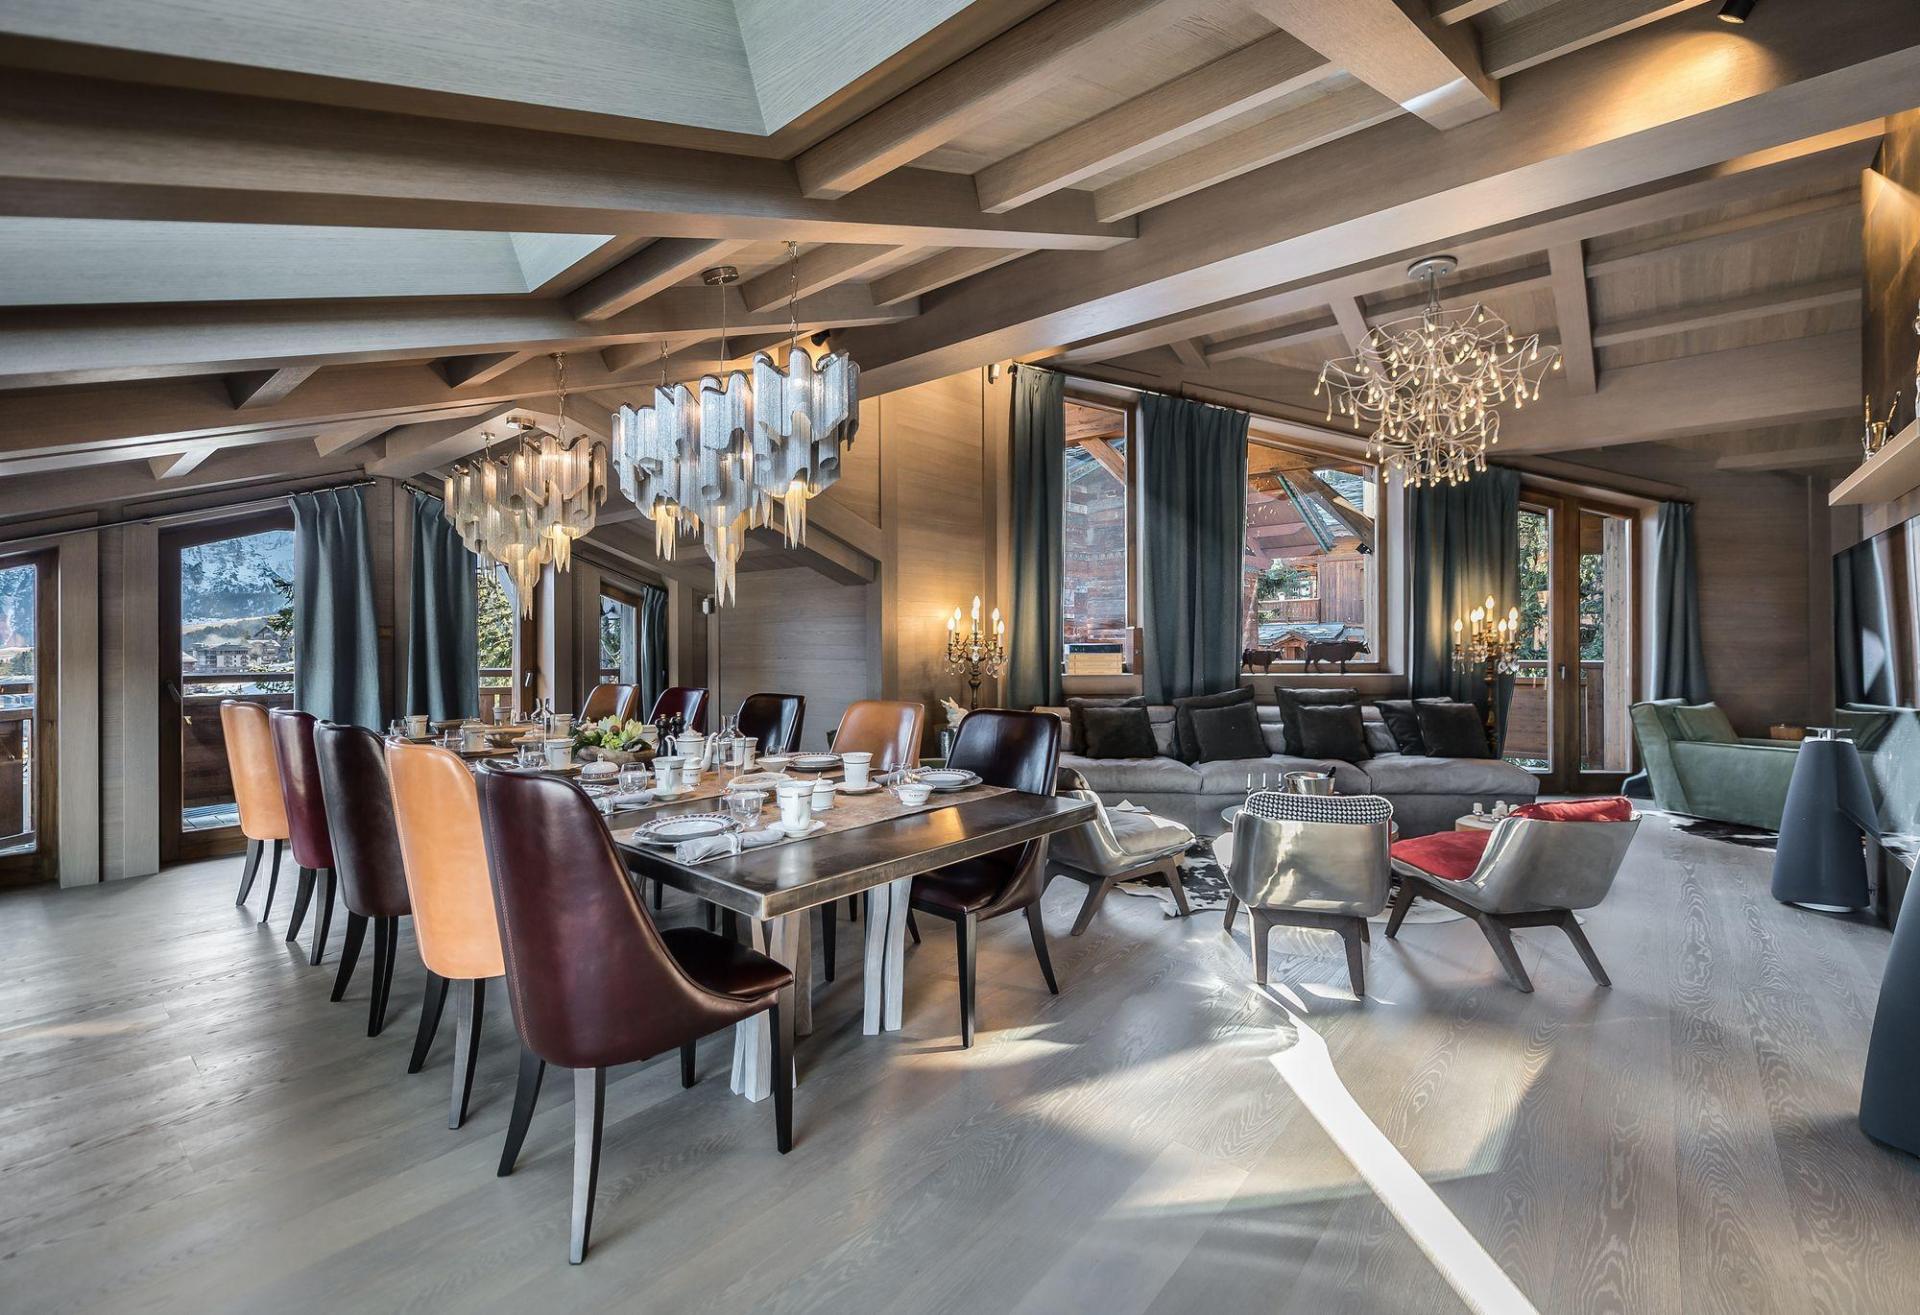 CHALET LE PALACE, A LUXURY SKI HOLIDAY RENTAL IN COURCHEVEL